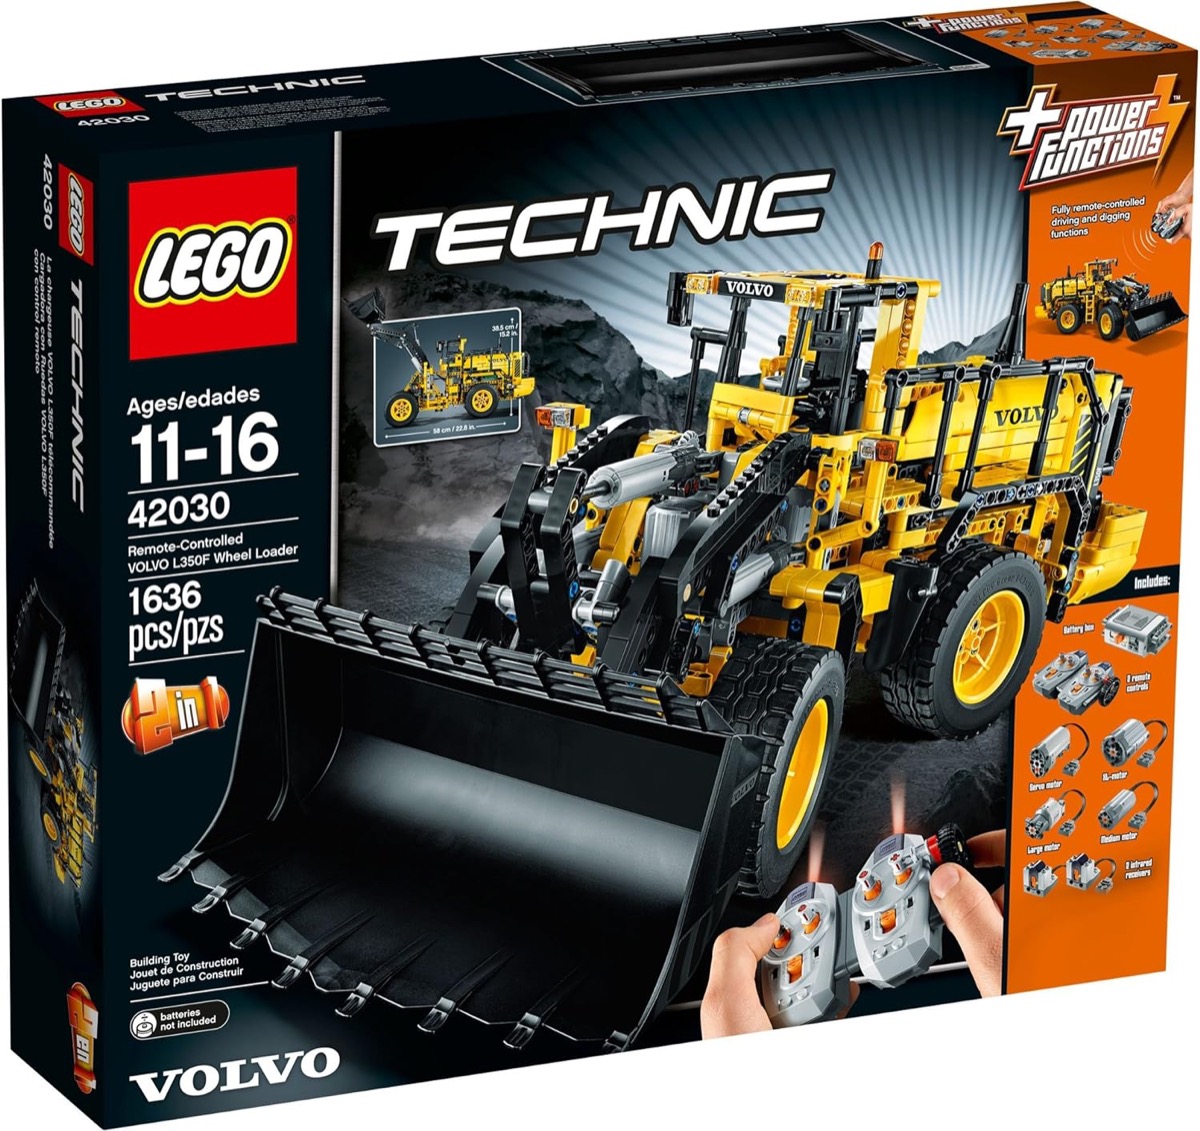 A box containing the LEGO VOLVO L350F Wheel Loader